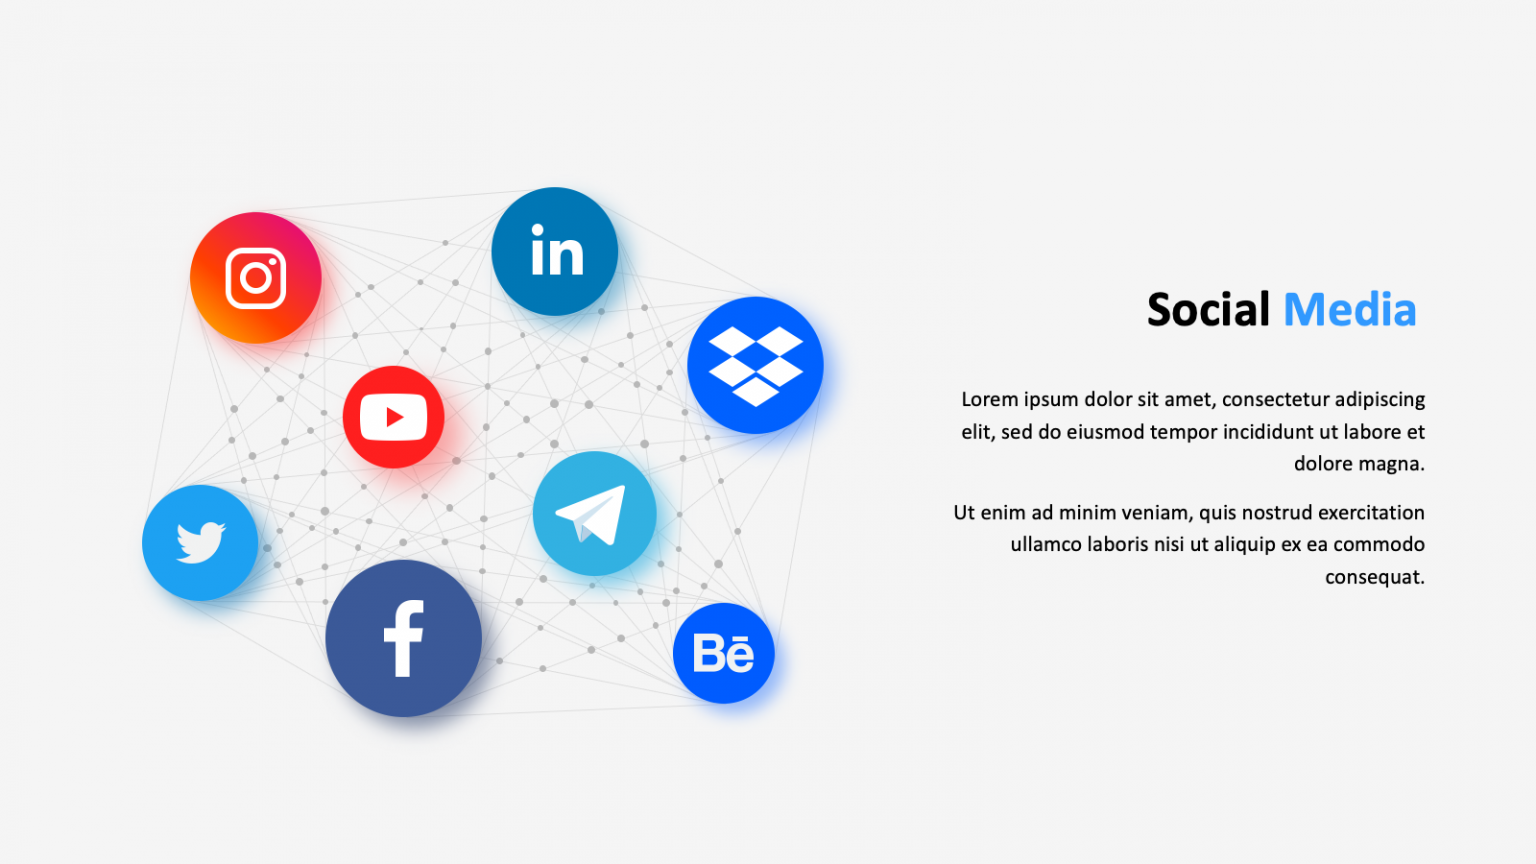 social networking ppt presentation free download